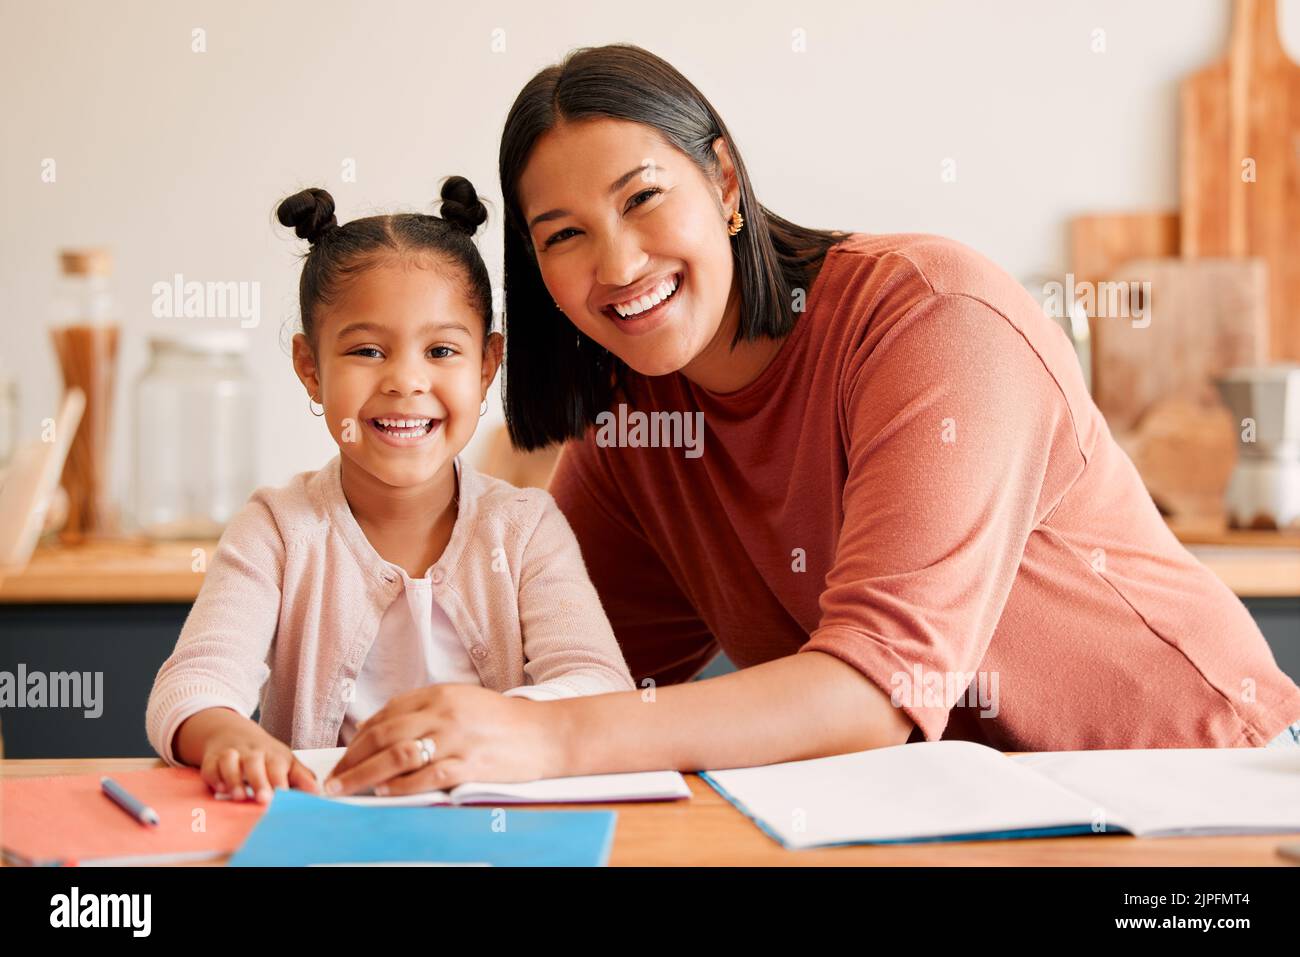 Mother helping, teaching and educating daughter with homework at home. Portrait of happy, loving and smiling mom and little girl busy with educational Stock Photo